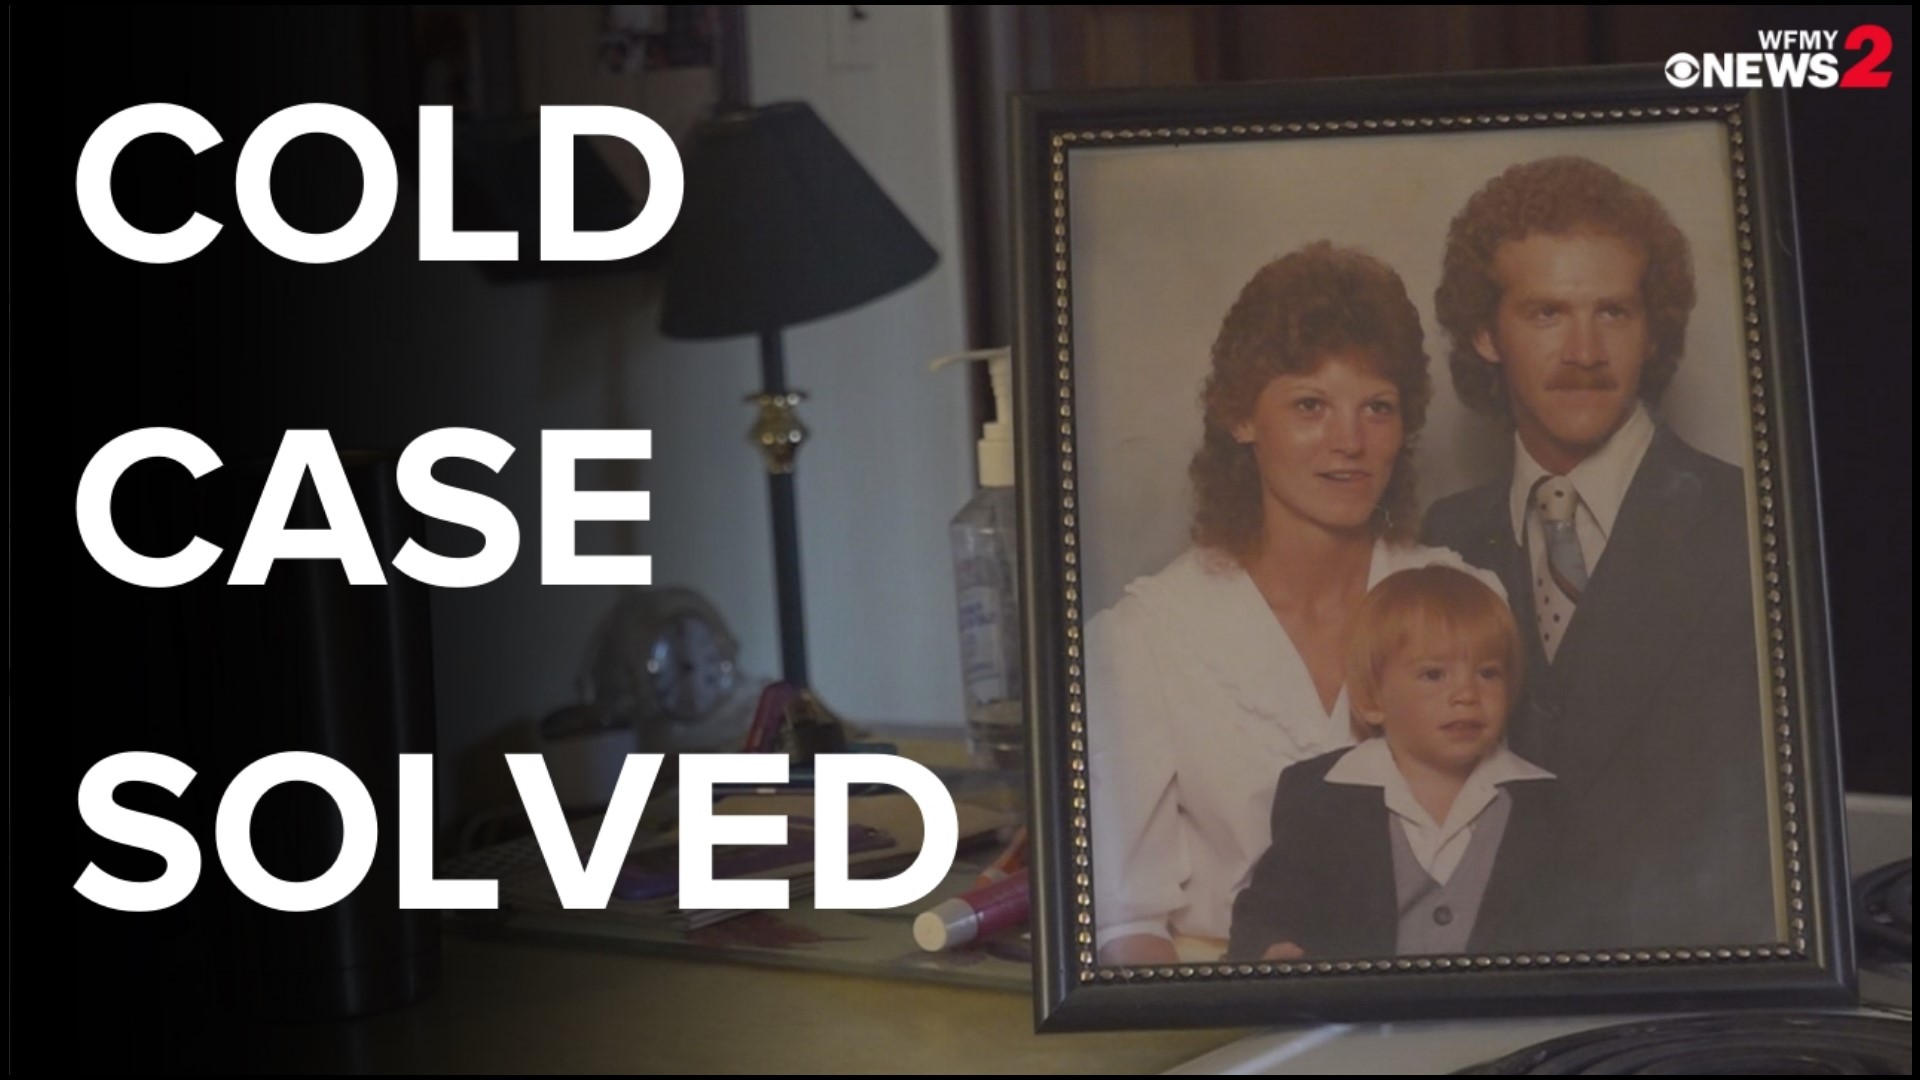 Mary Davis was abducted in 1987 while working at a hardware store. More than three decades later, investigators found her killer through DNA research.